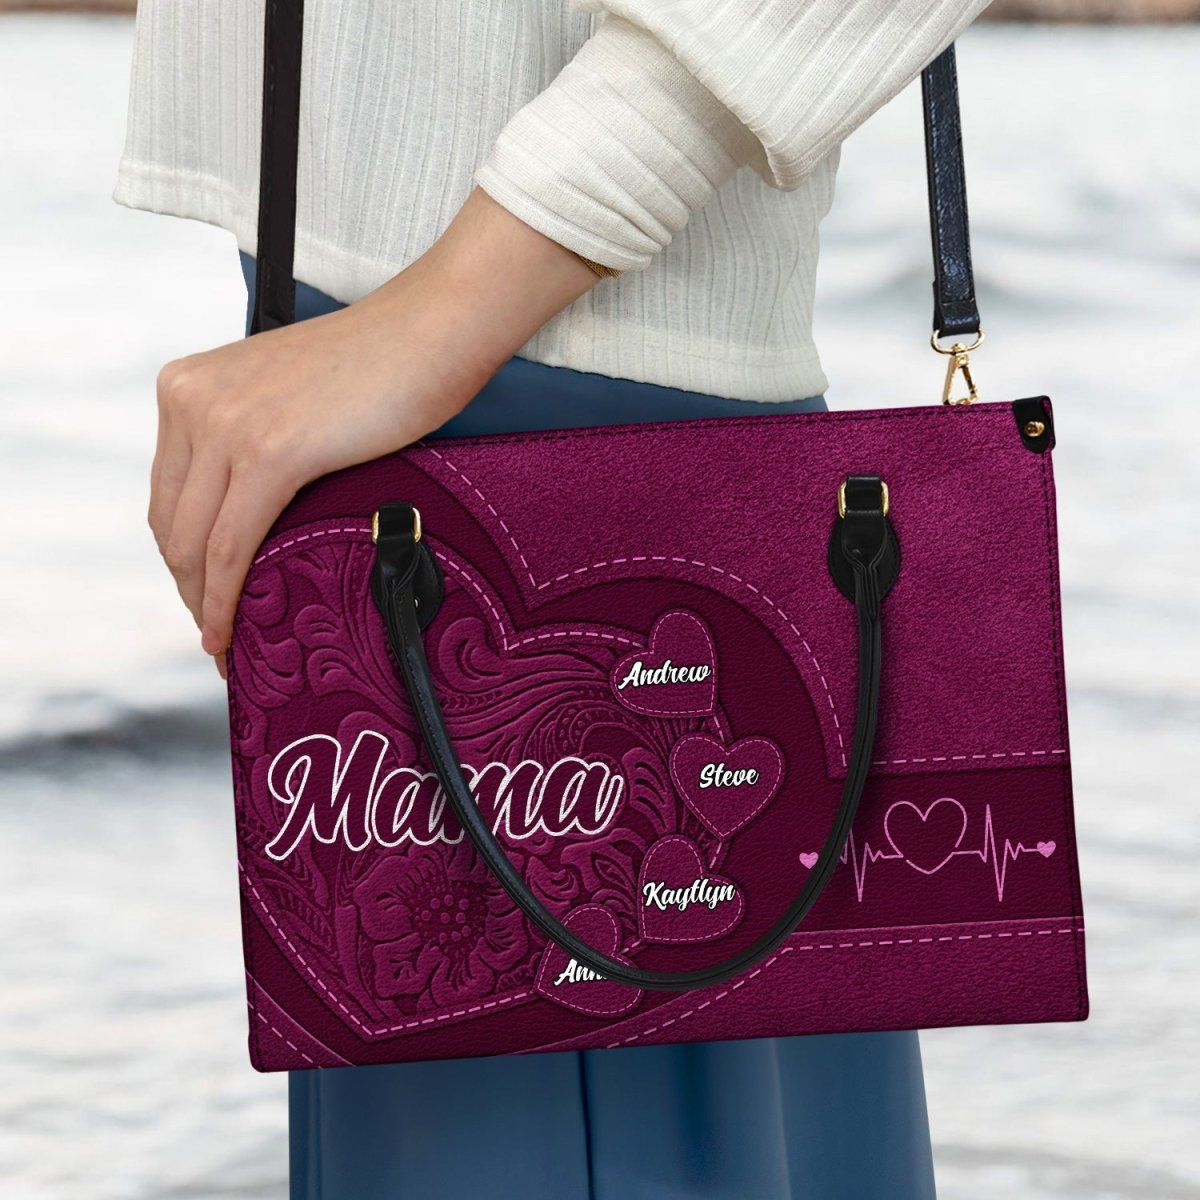 Family - Grandma's Little Sweethearts - Personalized Leather Bag (HJ) - The Next Custom Gift